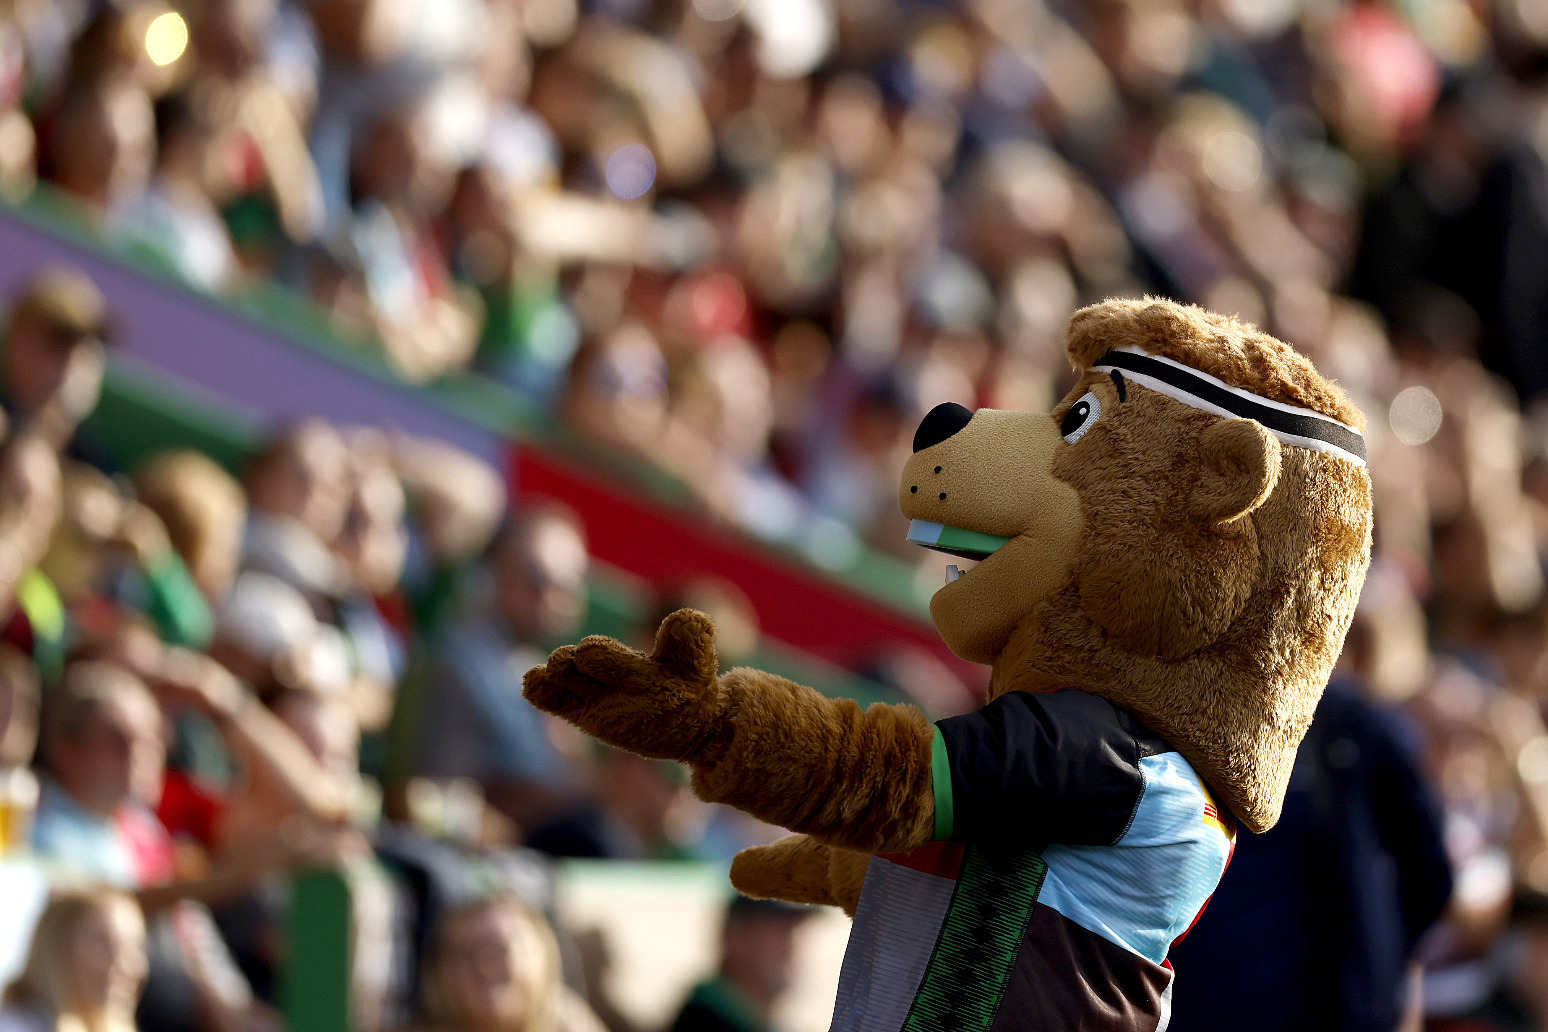 RPA seeks minimum salary after claiming mascots get paid more than some players 